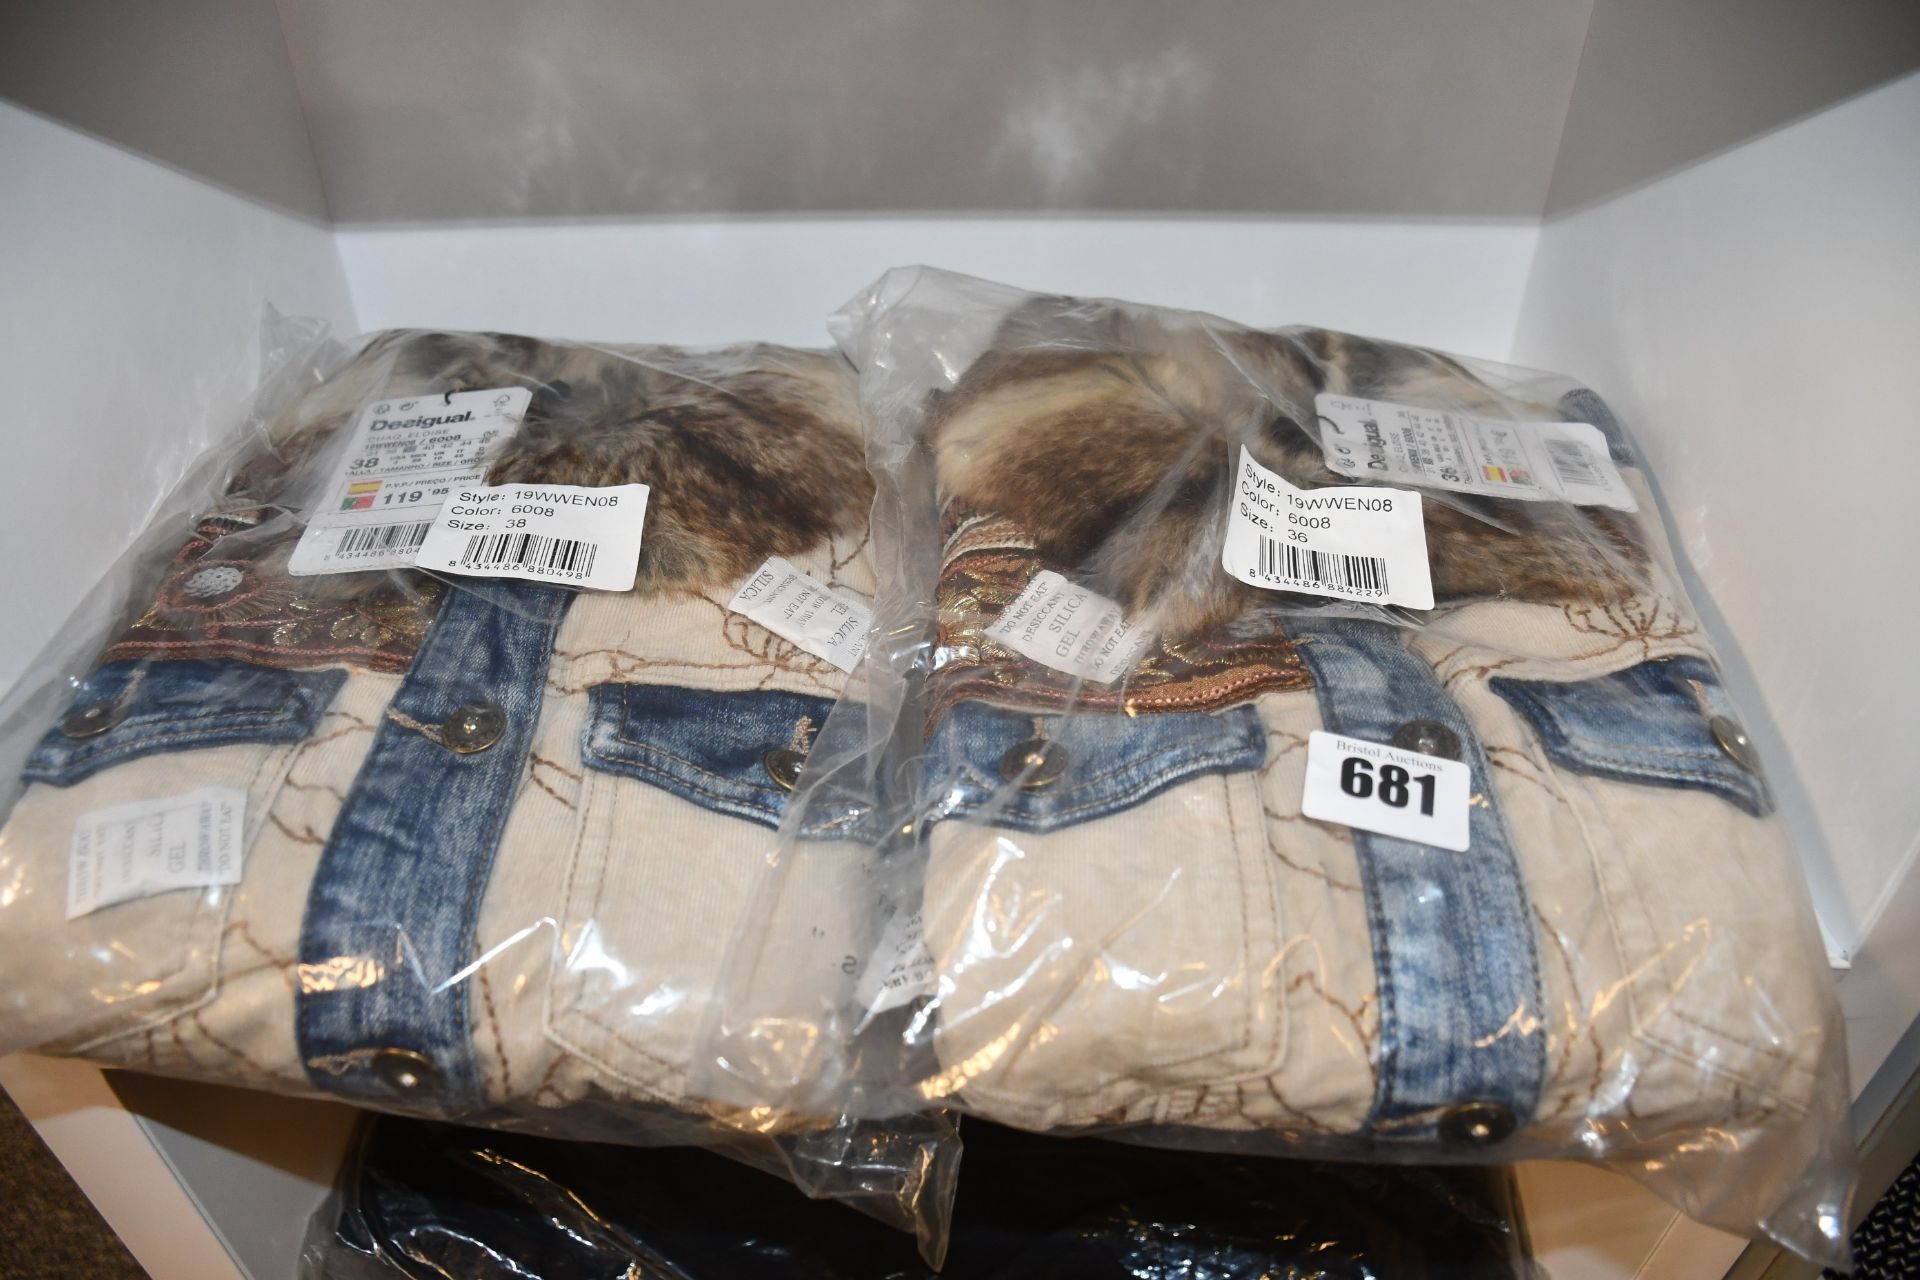 Two as new Desigual Eloise denim/cord/faux fur jackets (UK 8 and 10 - RRP €120 each).